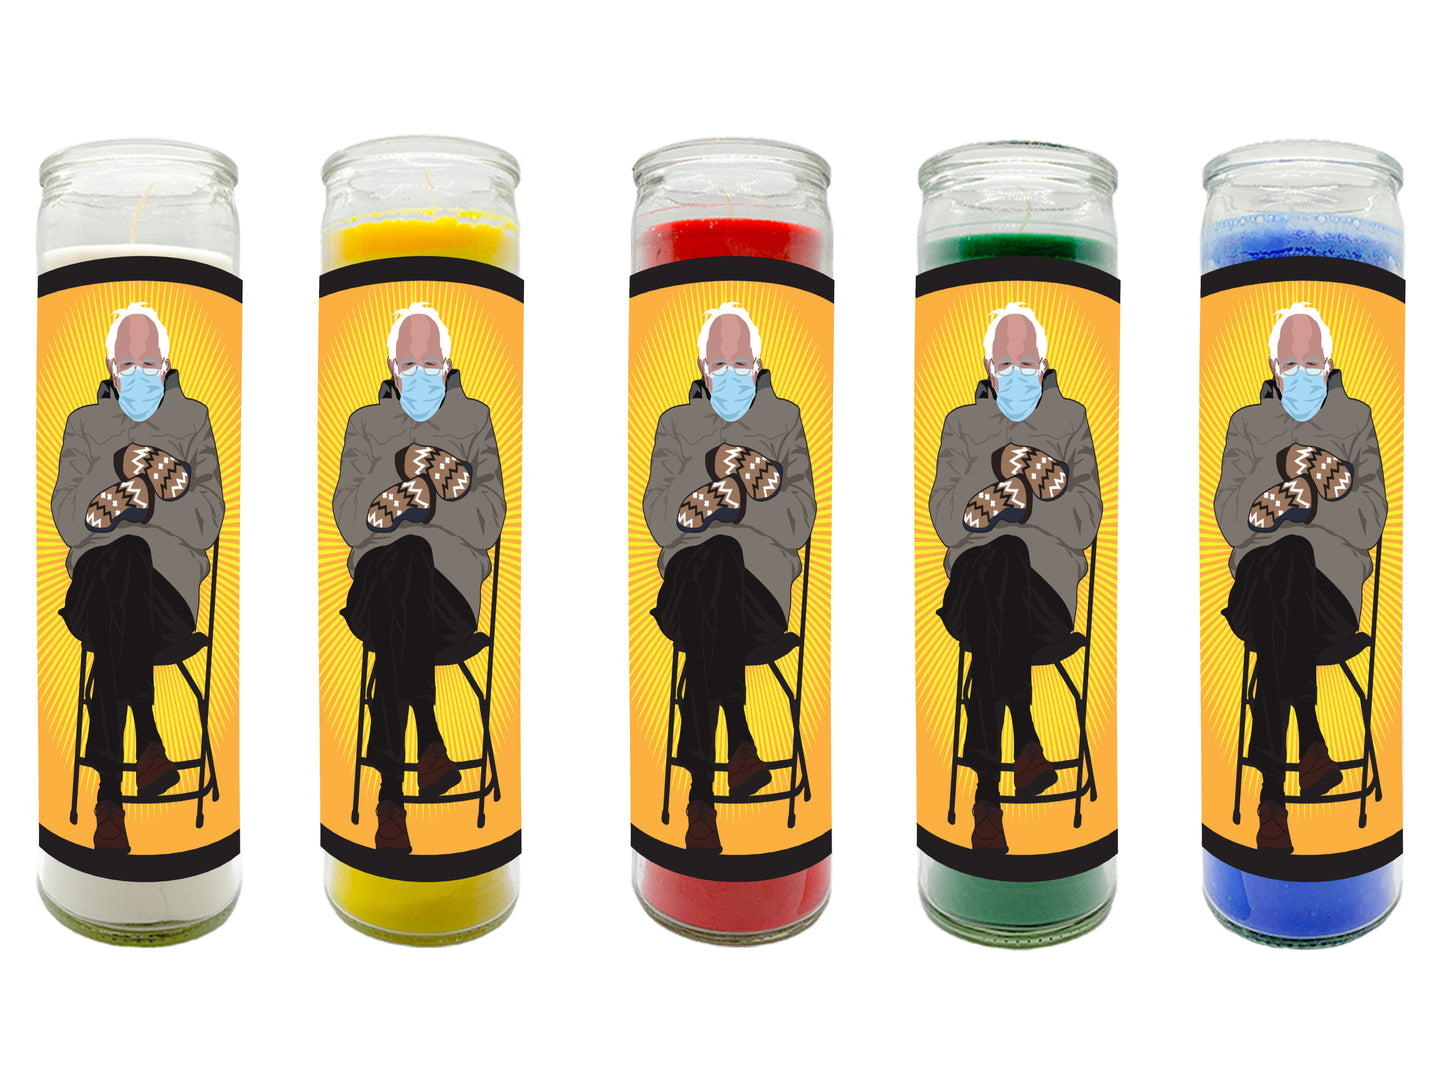 Bernie Sanders Chair and Mittens Inauguration Illustrated Saint Prayer Candle